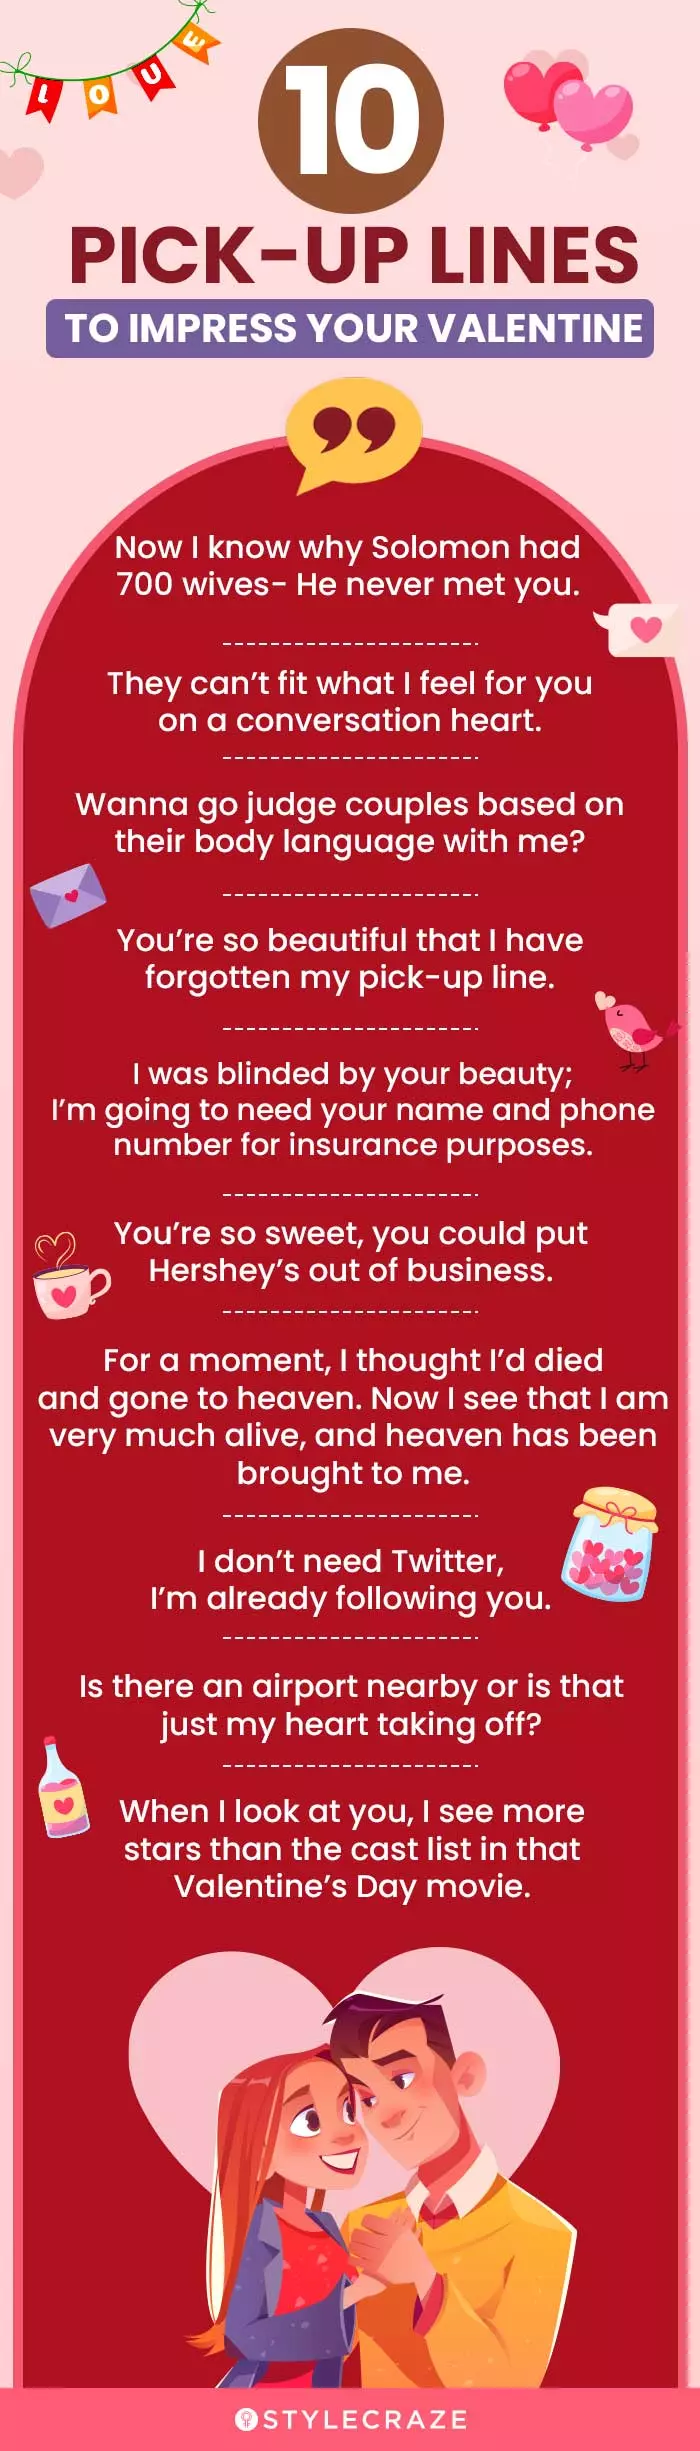 10 pickup lines to impress your valentine (infographic)